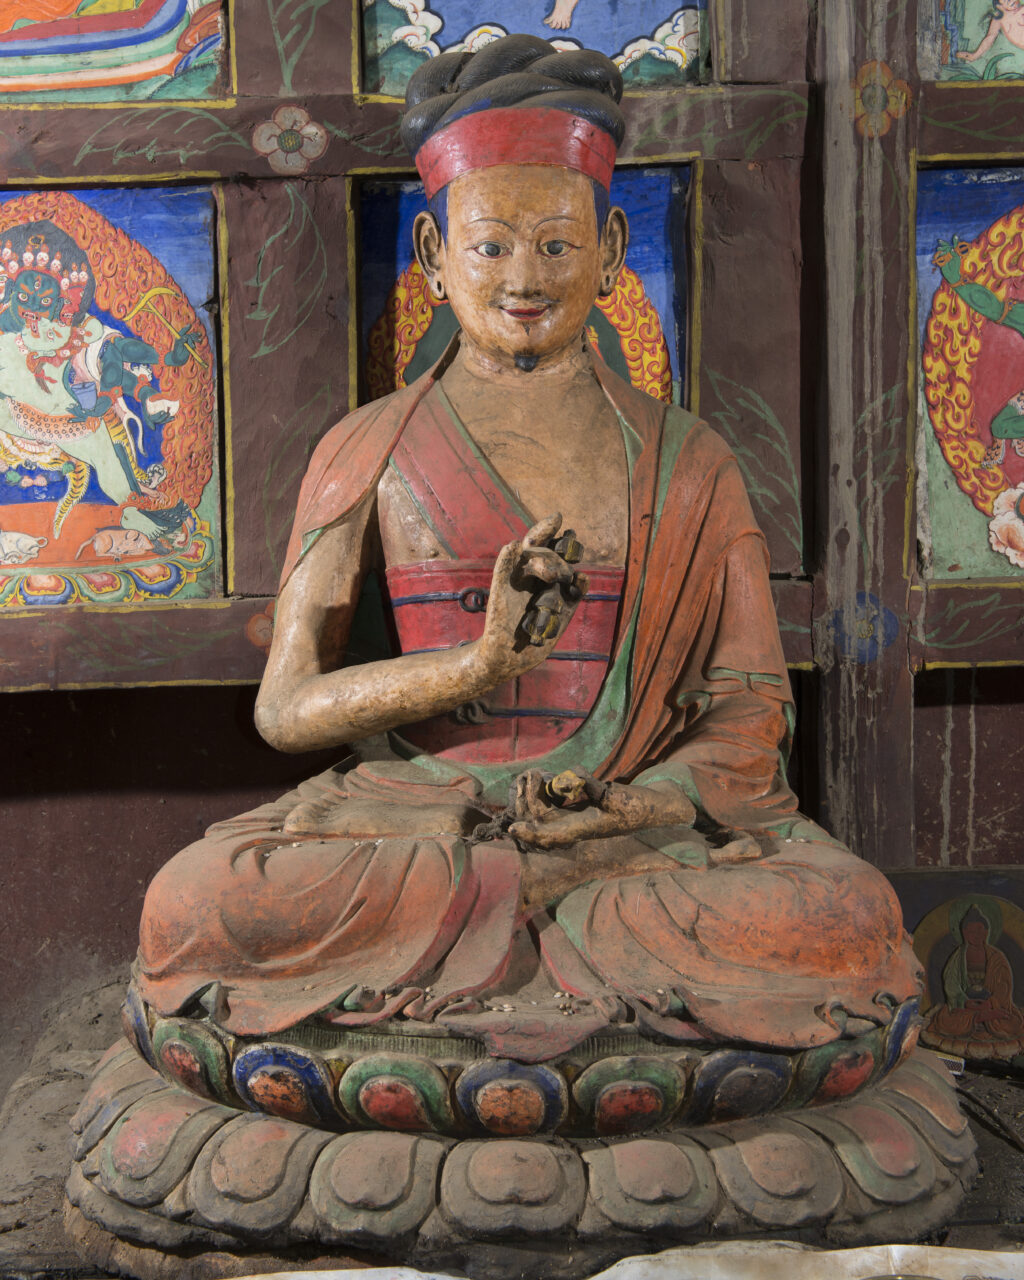 Polychrome statue depicting lama seated on lotus pedestal with hands in mudras at chest and in lap